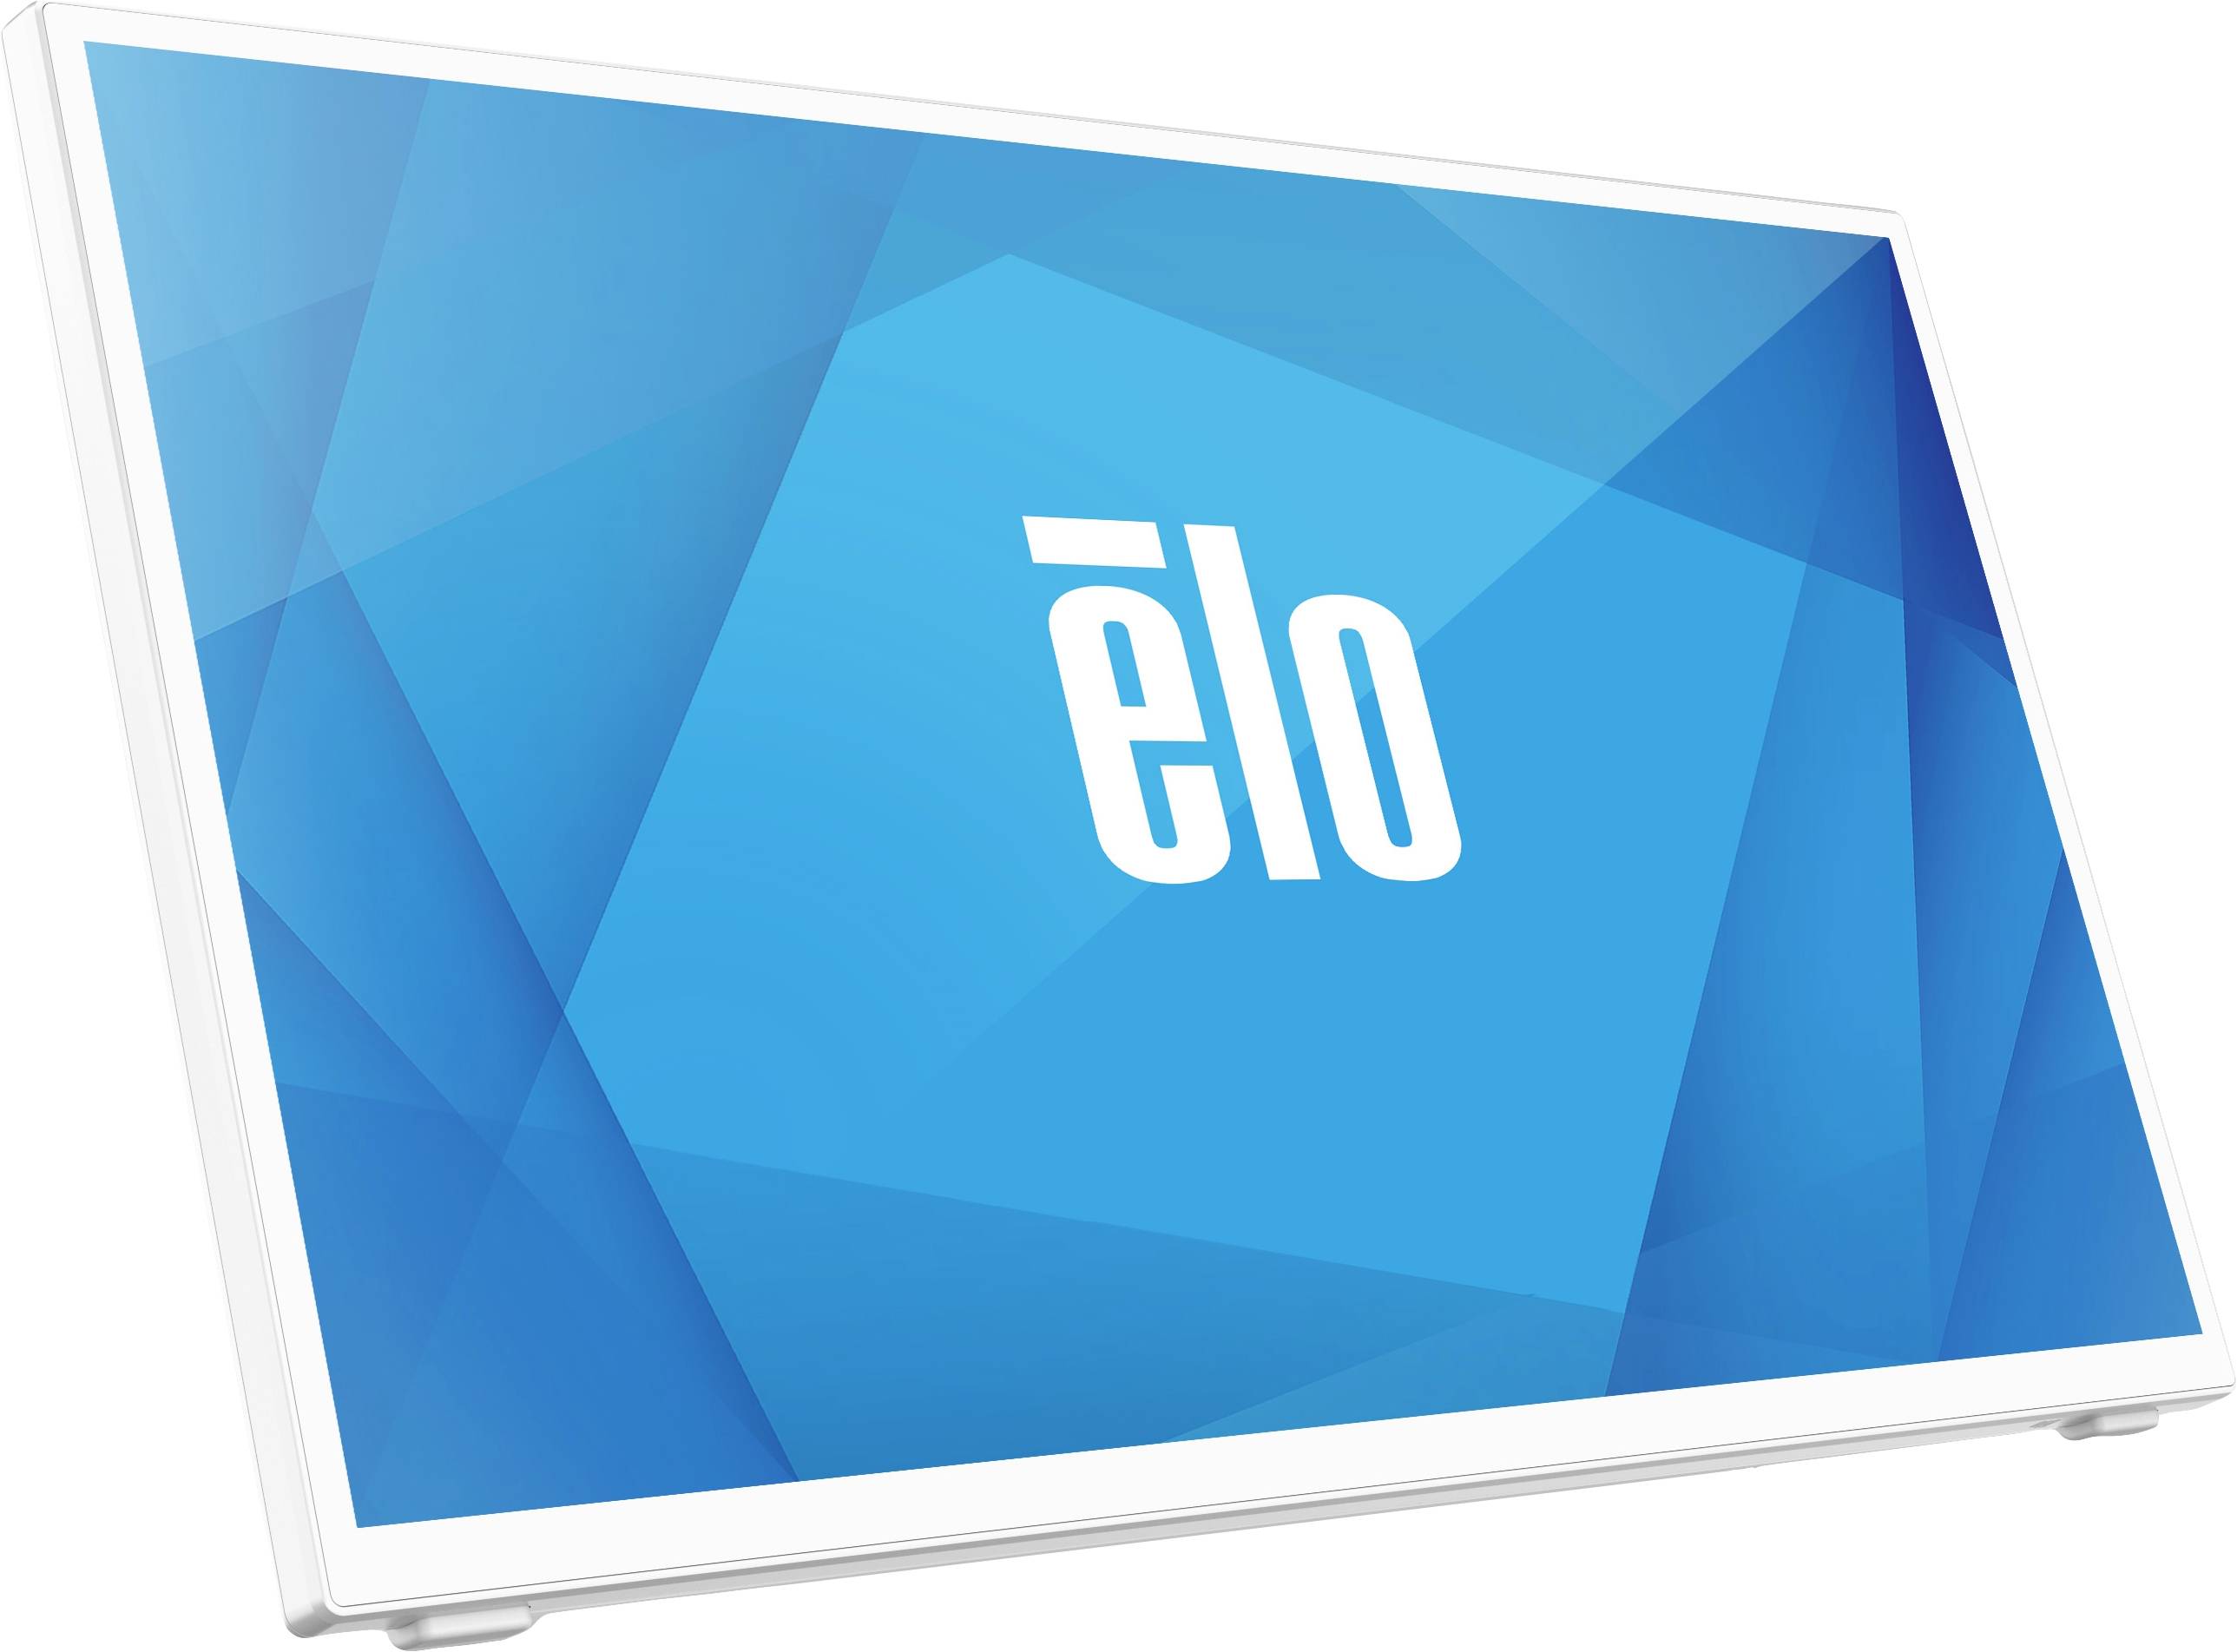 ELO TOUCH Solutions Elo 2470L 61cm (24\")